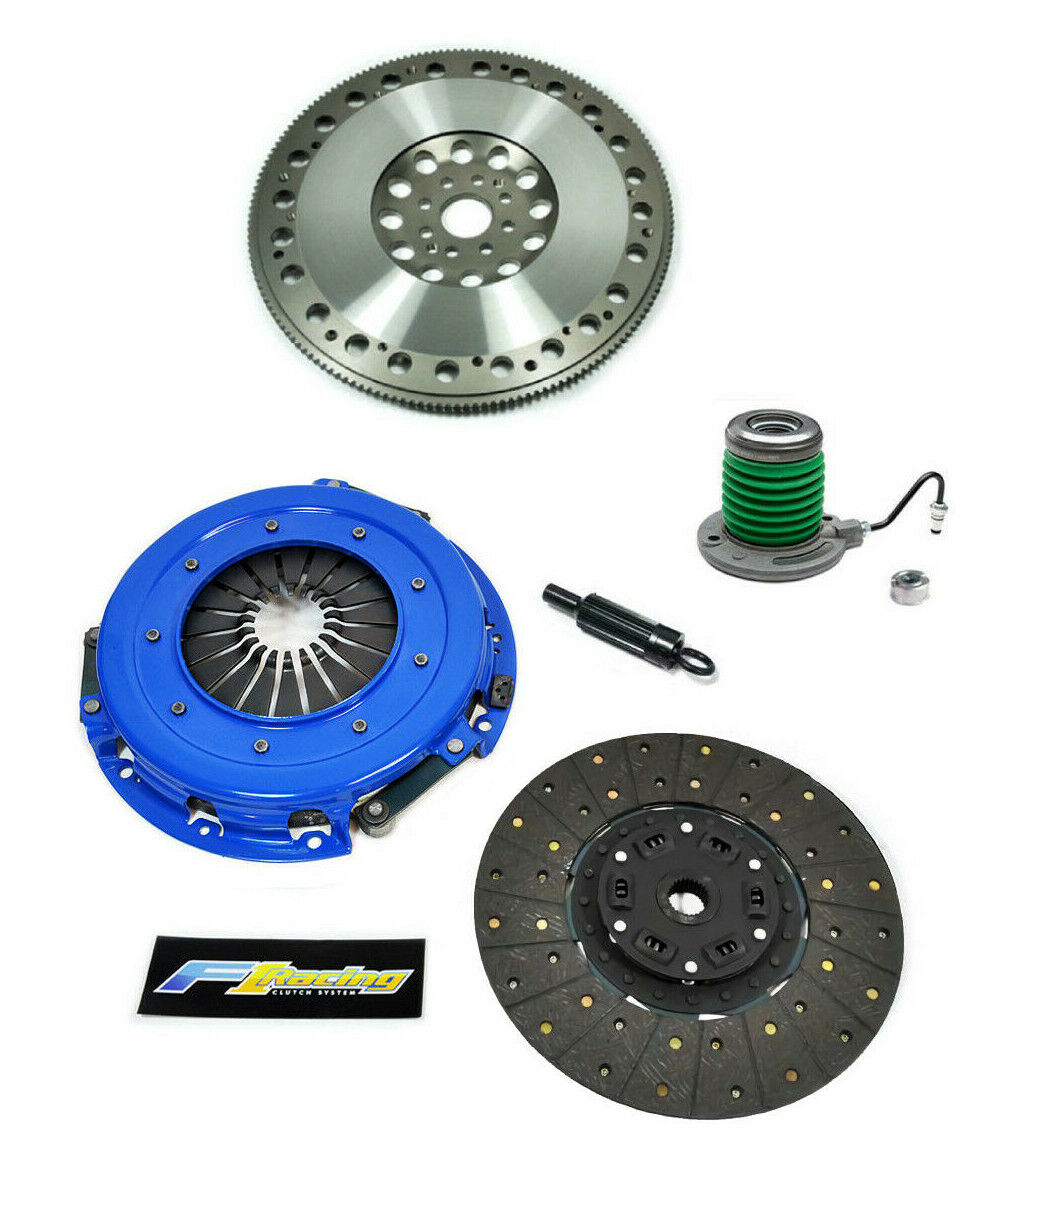 FX STAGE 1 CLUTCH KIT+RACE PROLITE FLYWHEEL for 07-09 FORD MUSTANG SHELBY GT500